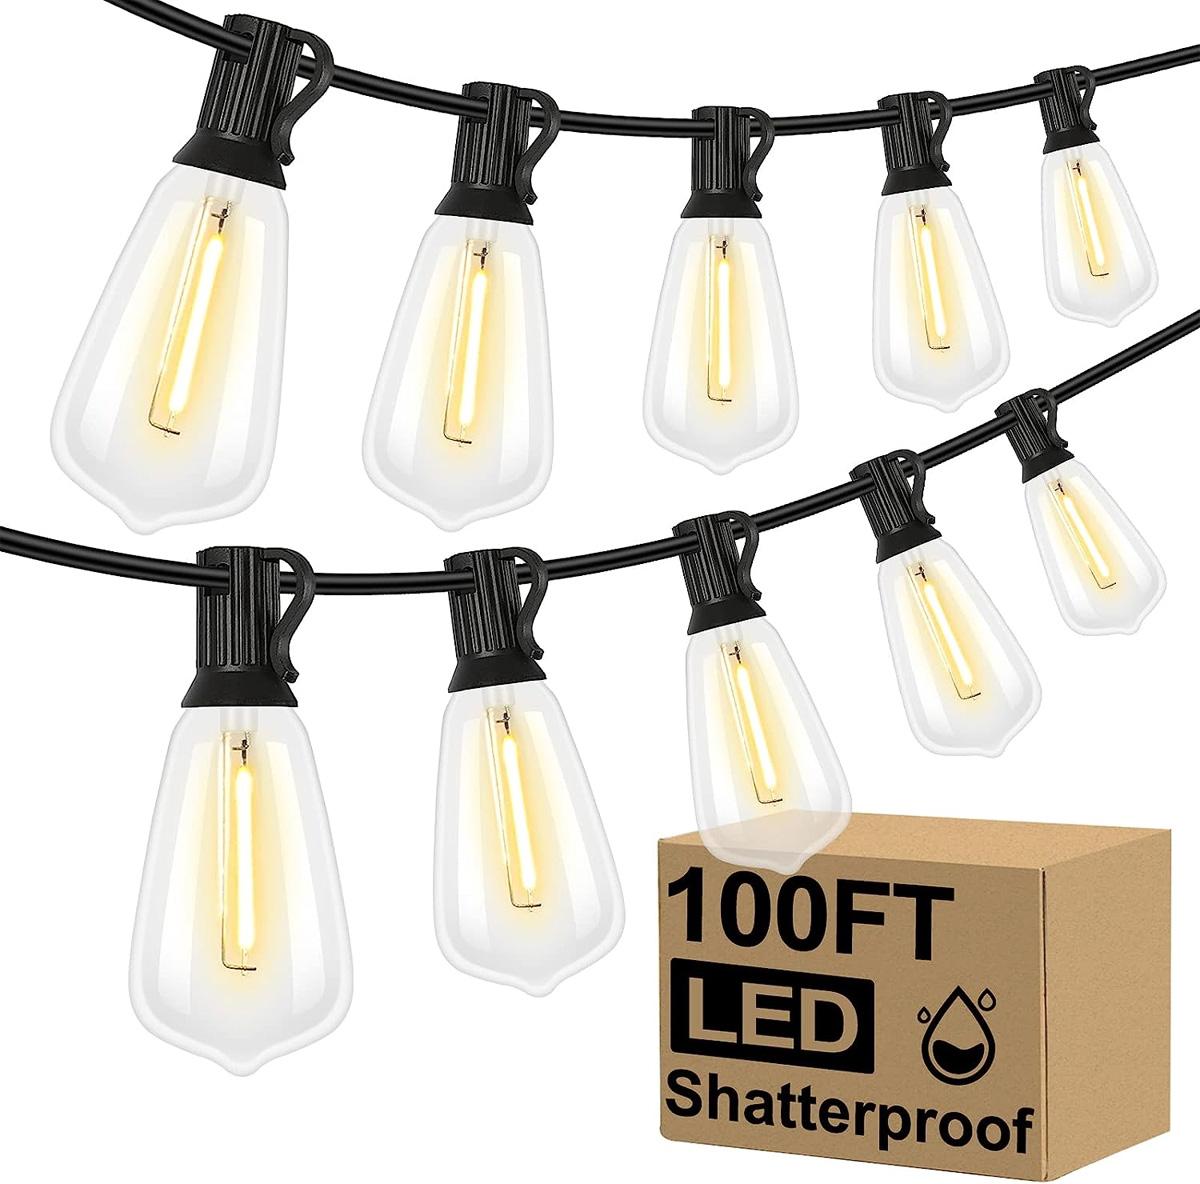 Brightever 100ft LED Outdoor String Lights for $25.19 Shipped